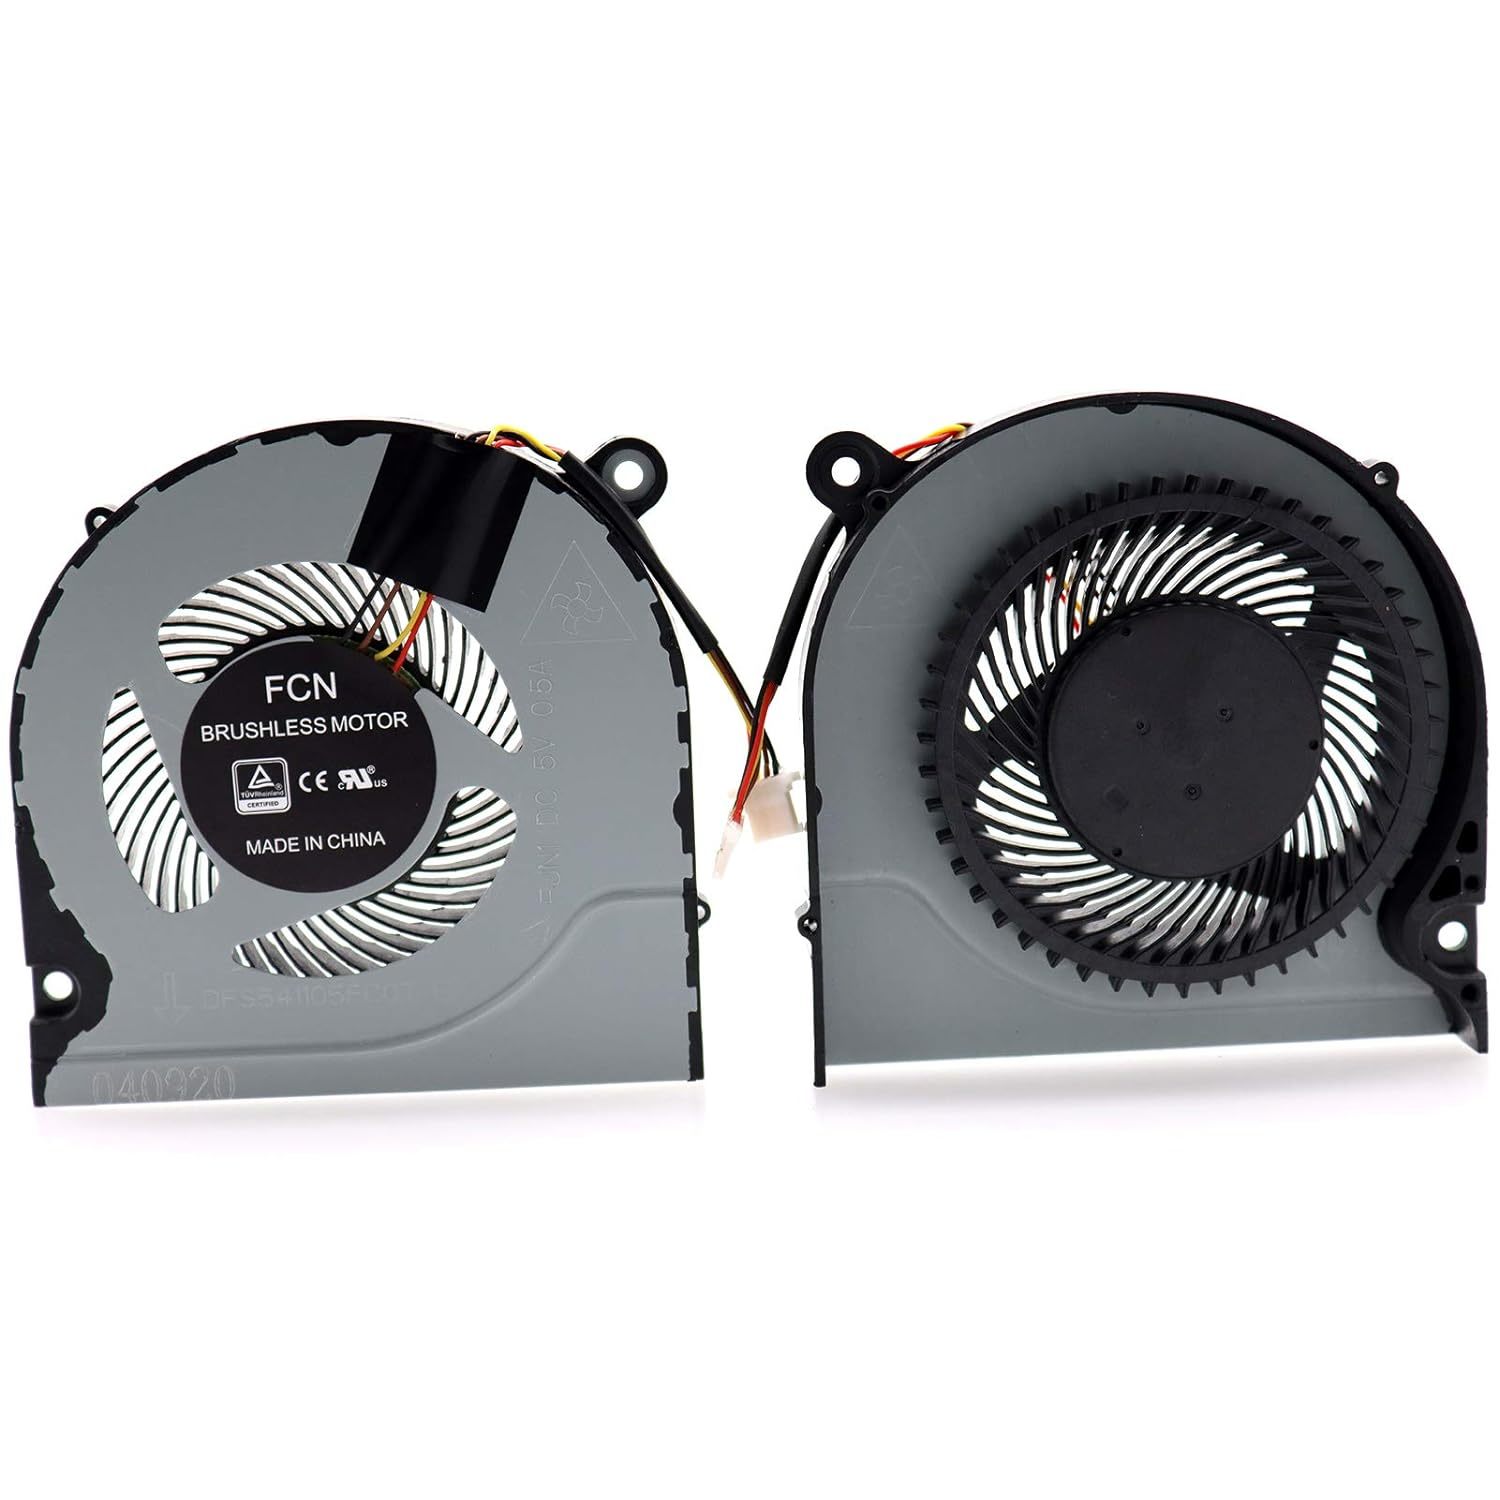 Gpu Cpu Cooling Fan Replacement (No Cover) For Acer Nitro 5 An515 An515-51 An515 - $35.99